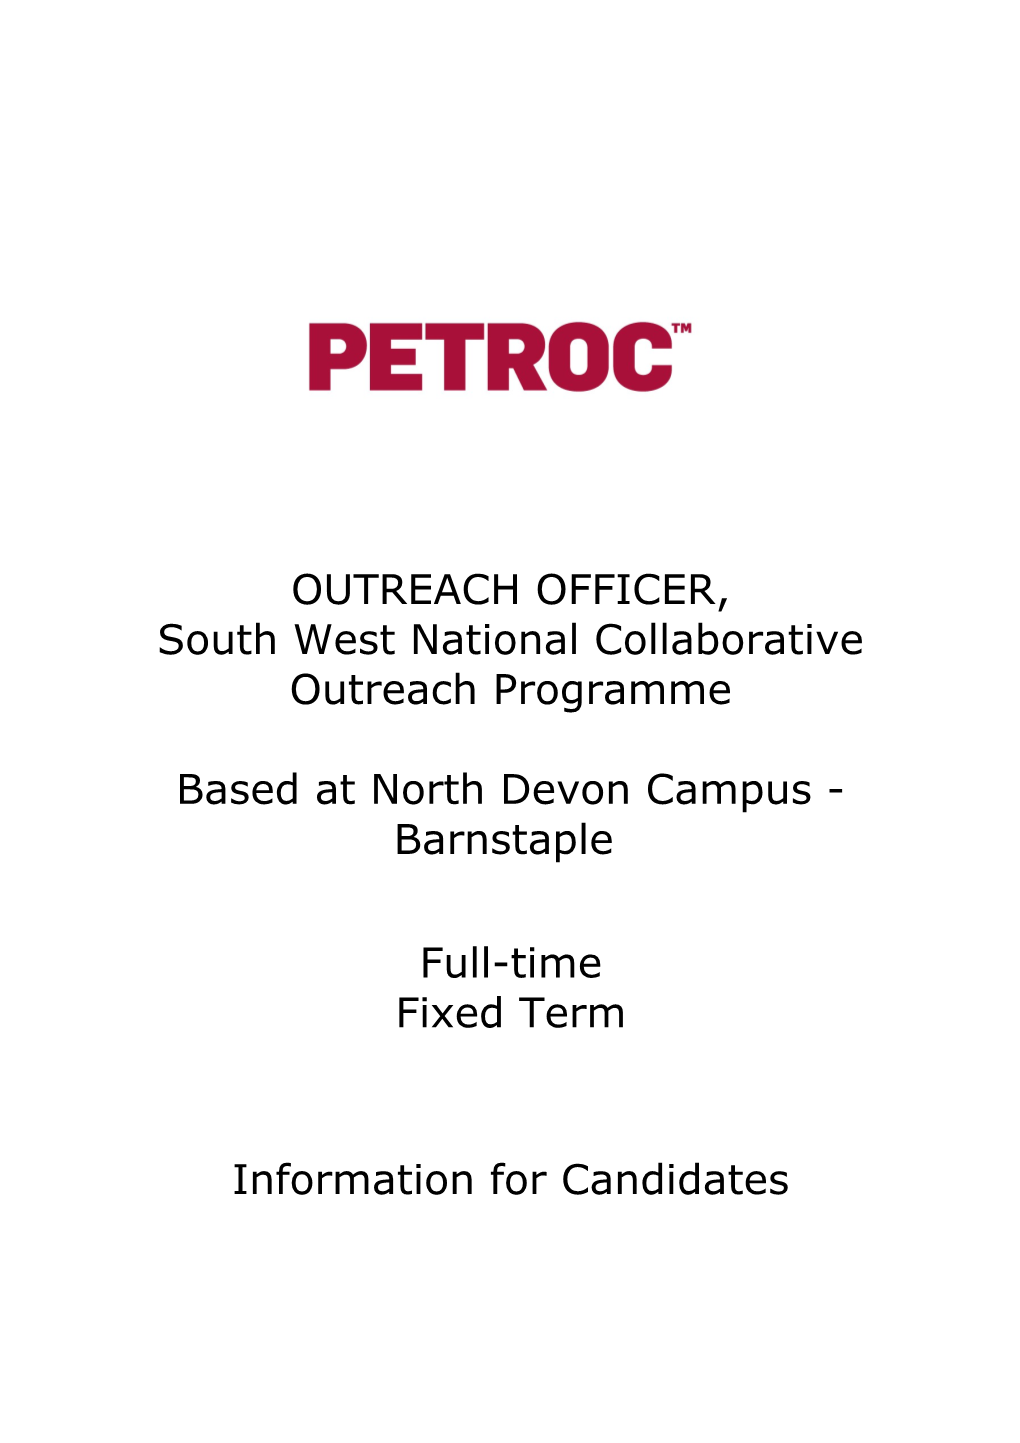 South West National Collaborative Outreach Programme